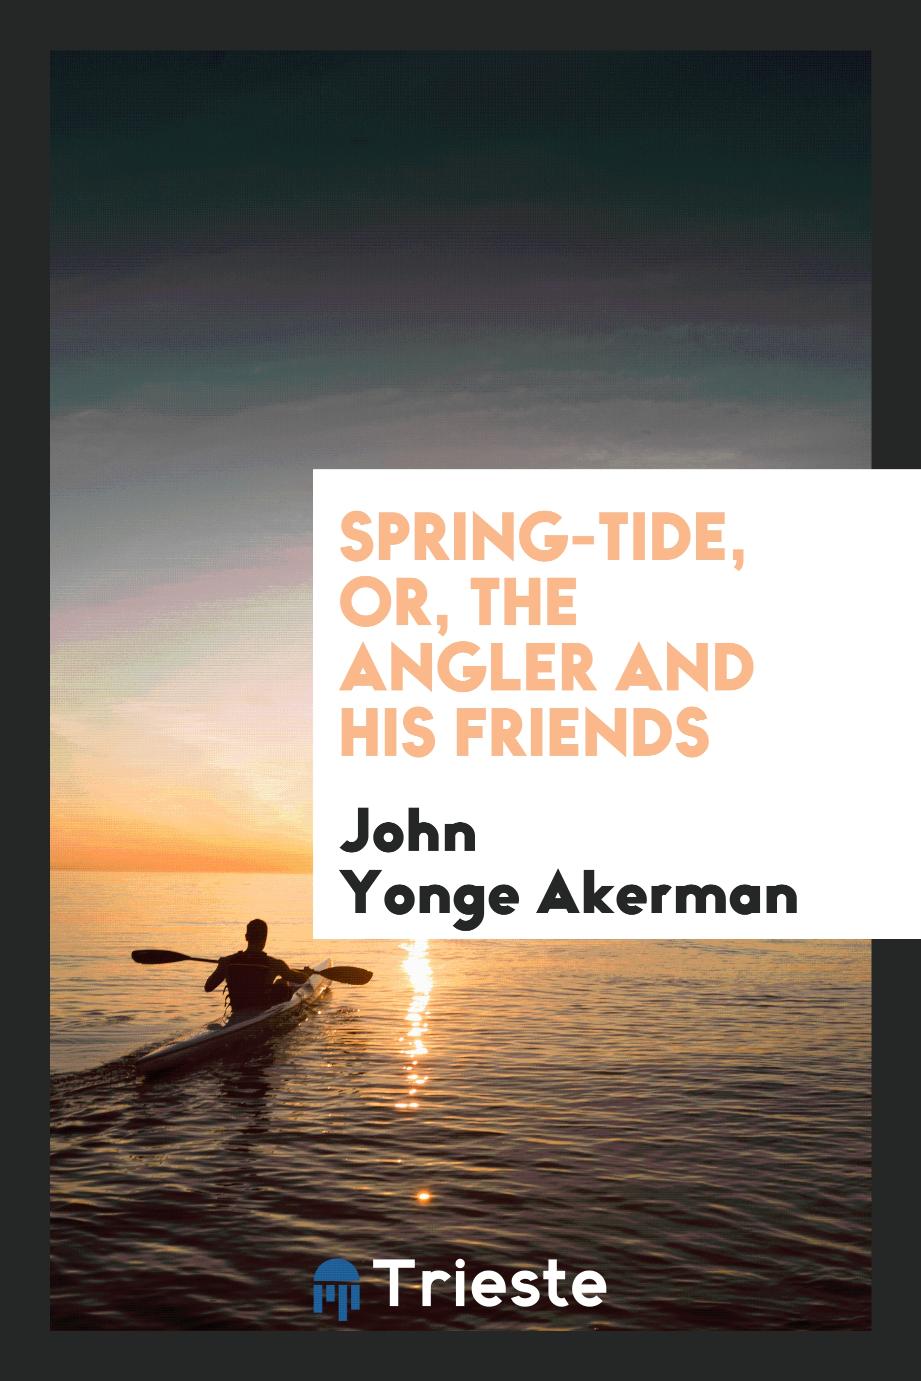 Spring-tide, or, The angler and his friends